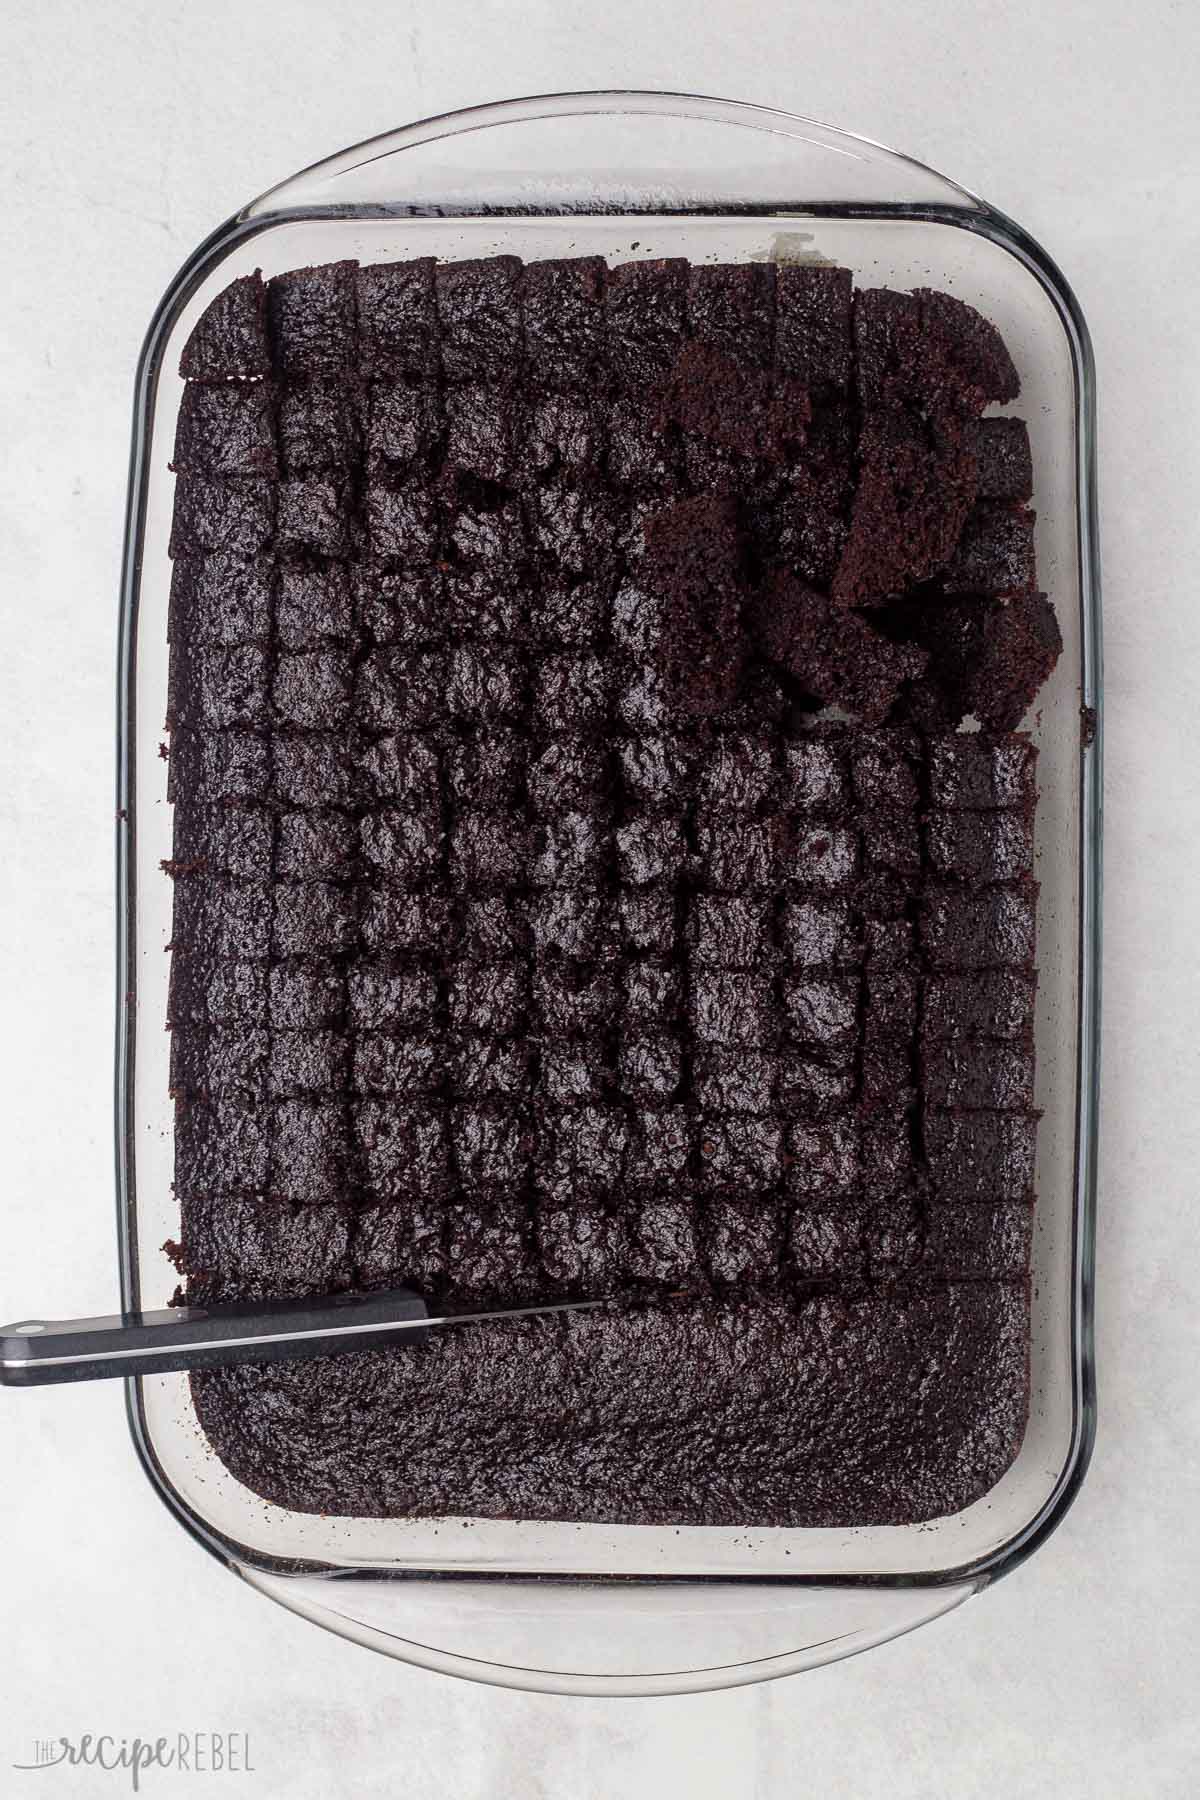 cubed chocolate cake in glass pan.